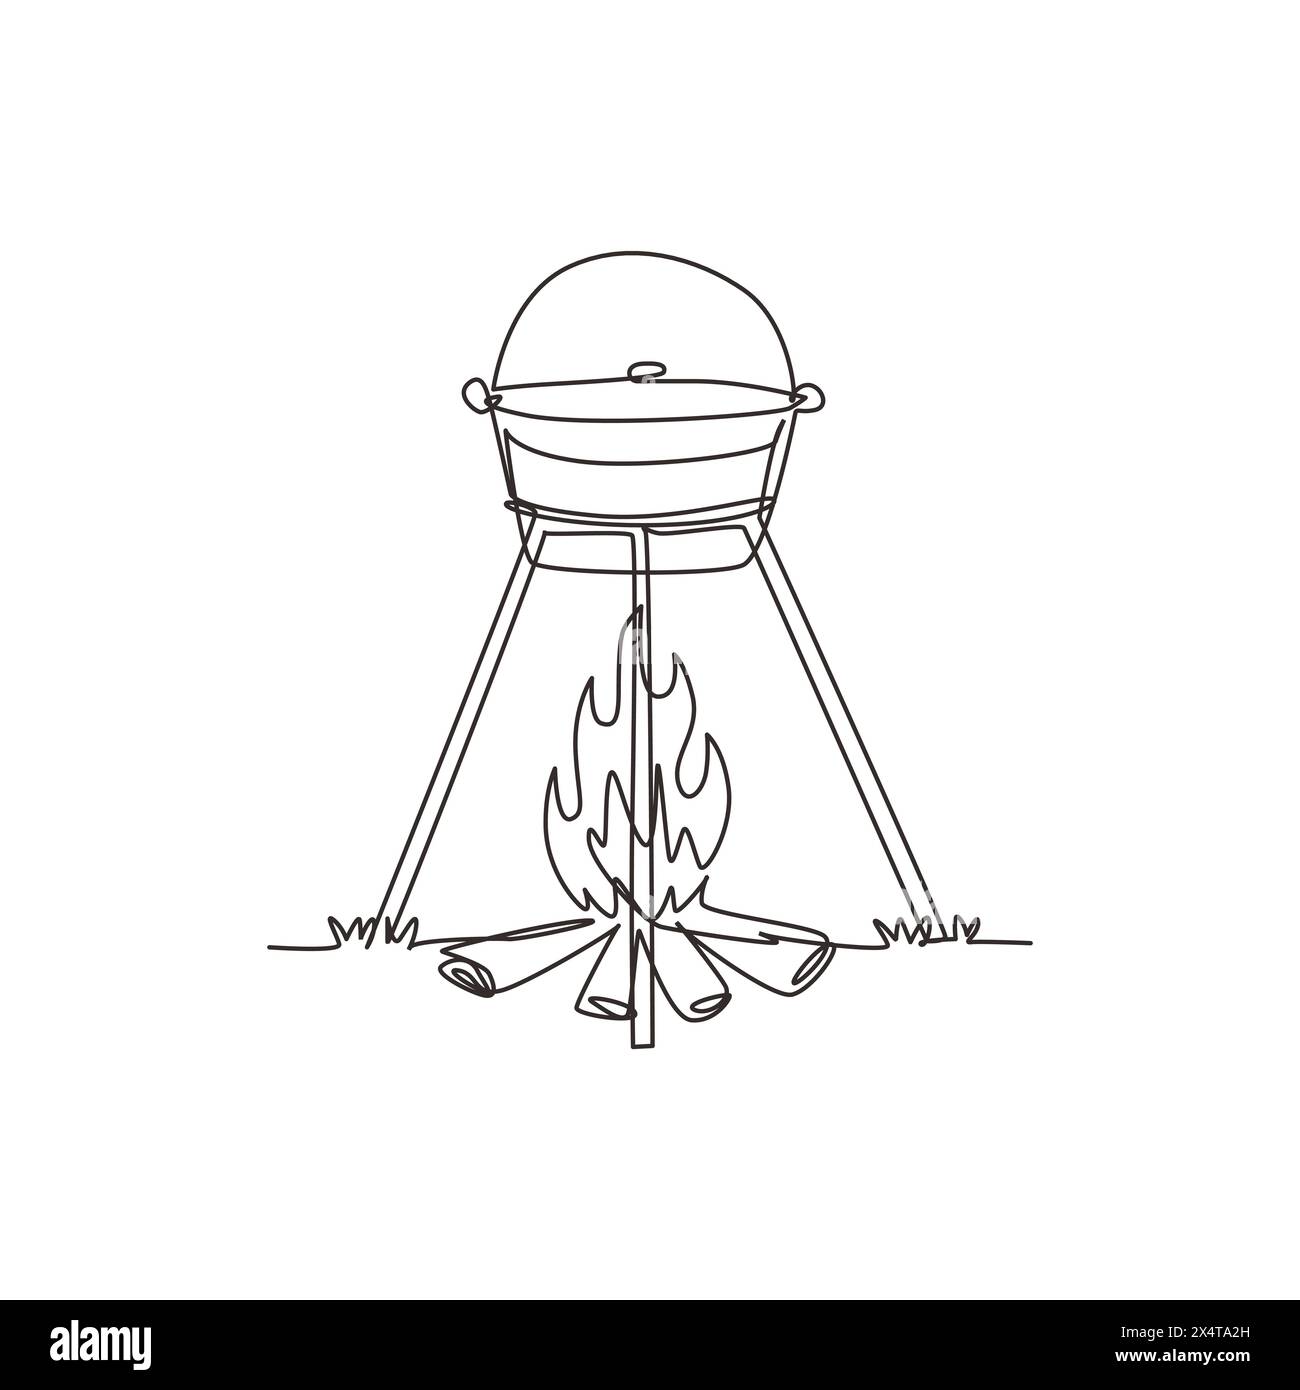 Single one line drawing cooking dinner in camping pot over bonfire. Cauldron and campfire. Outdoor grass, branch, stones. outdoor nature picnic. Conti Stock Vector